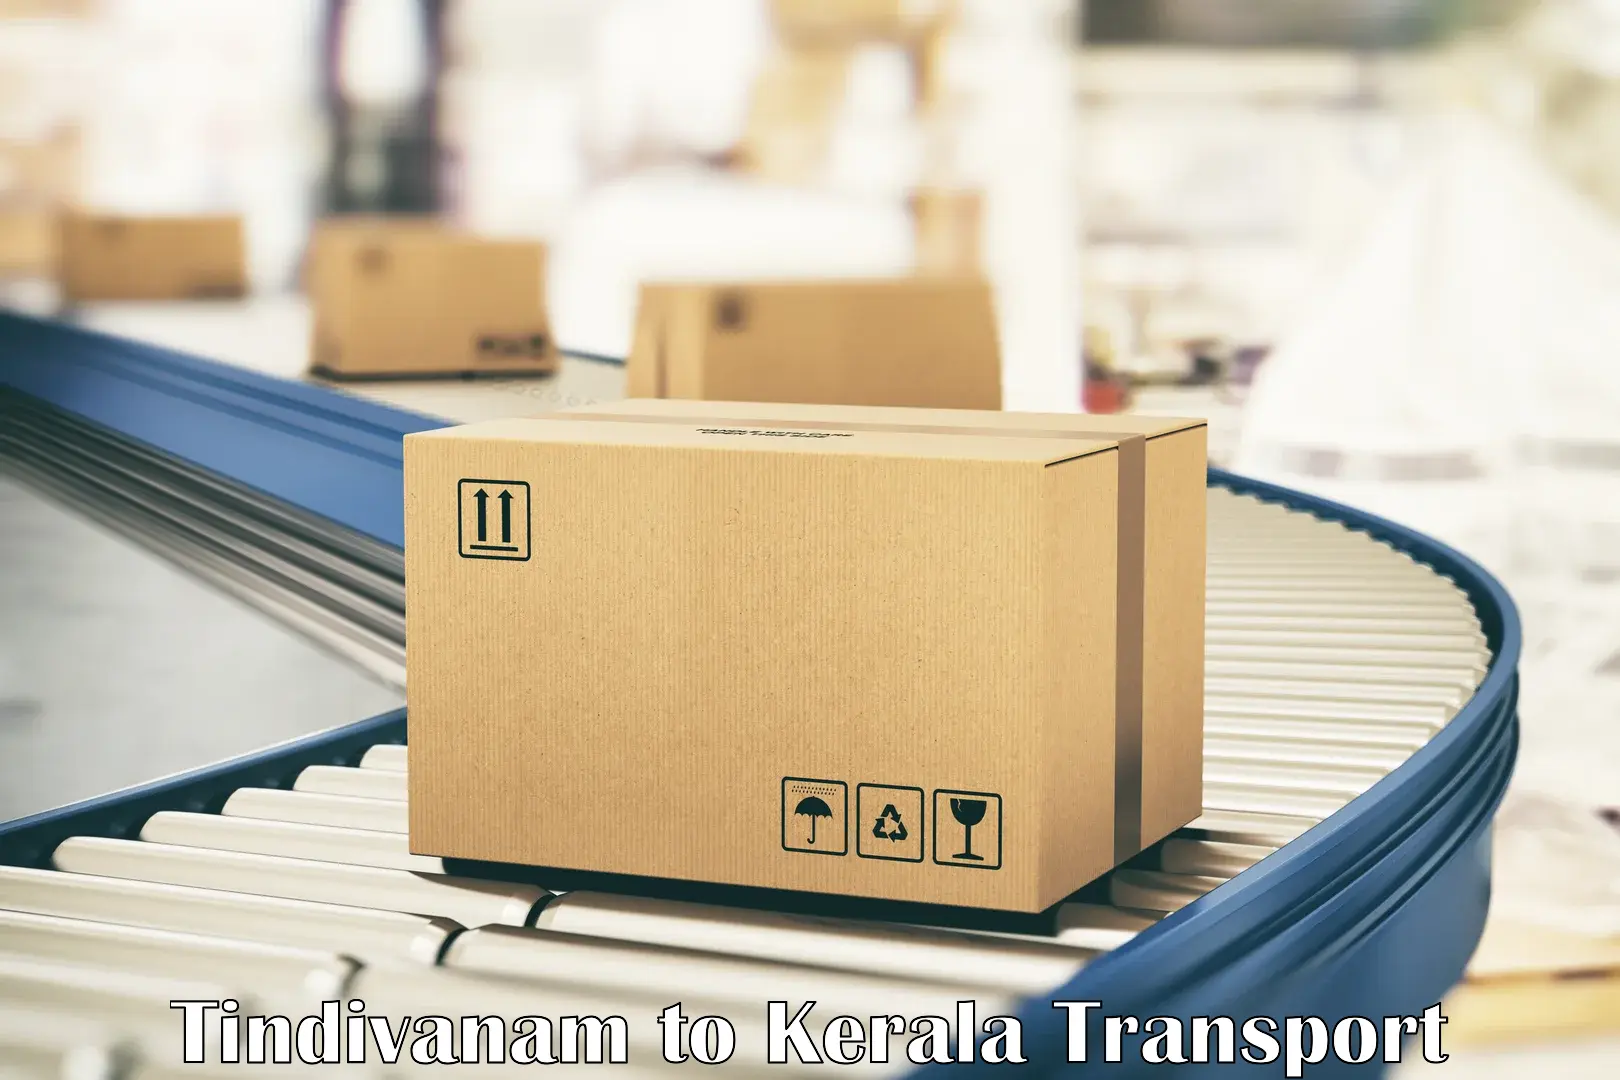 Goods delivery service in Tindivanam to Kattappana